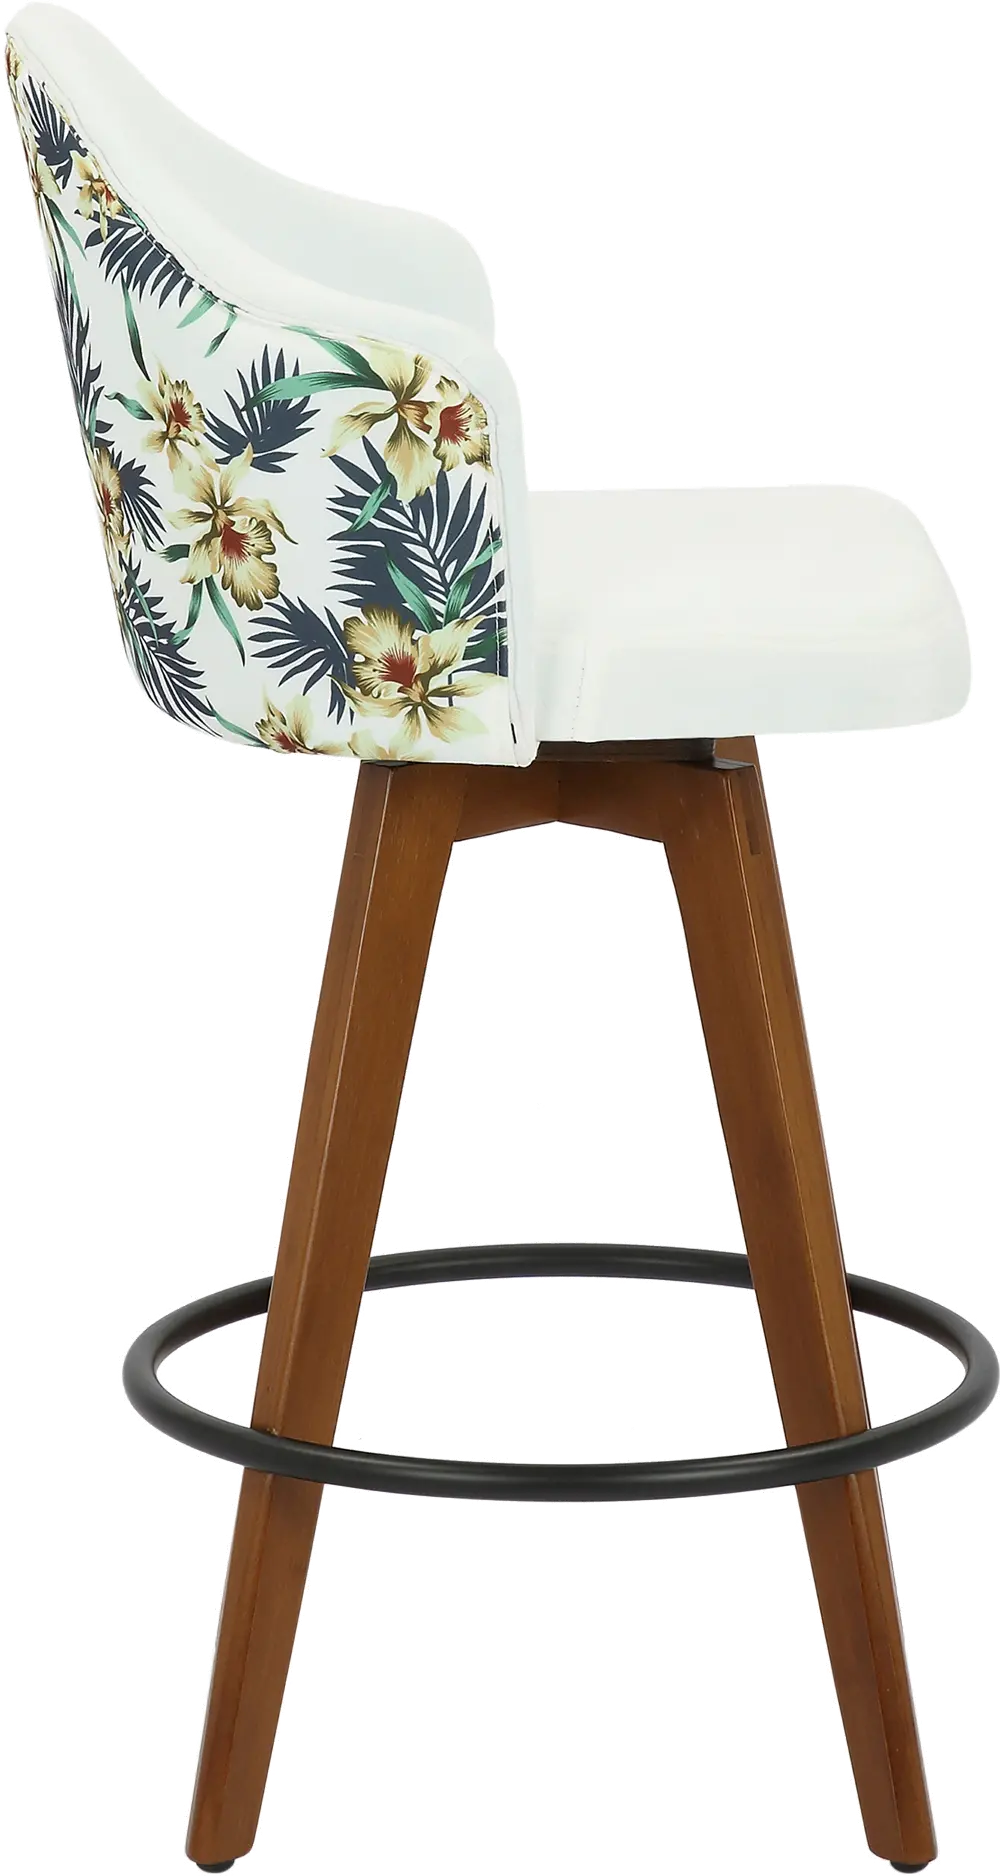 B26-AHOY FLORAL WLW Contemporary White and Floral Swivel Counter Height Stool - Ahoy-1